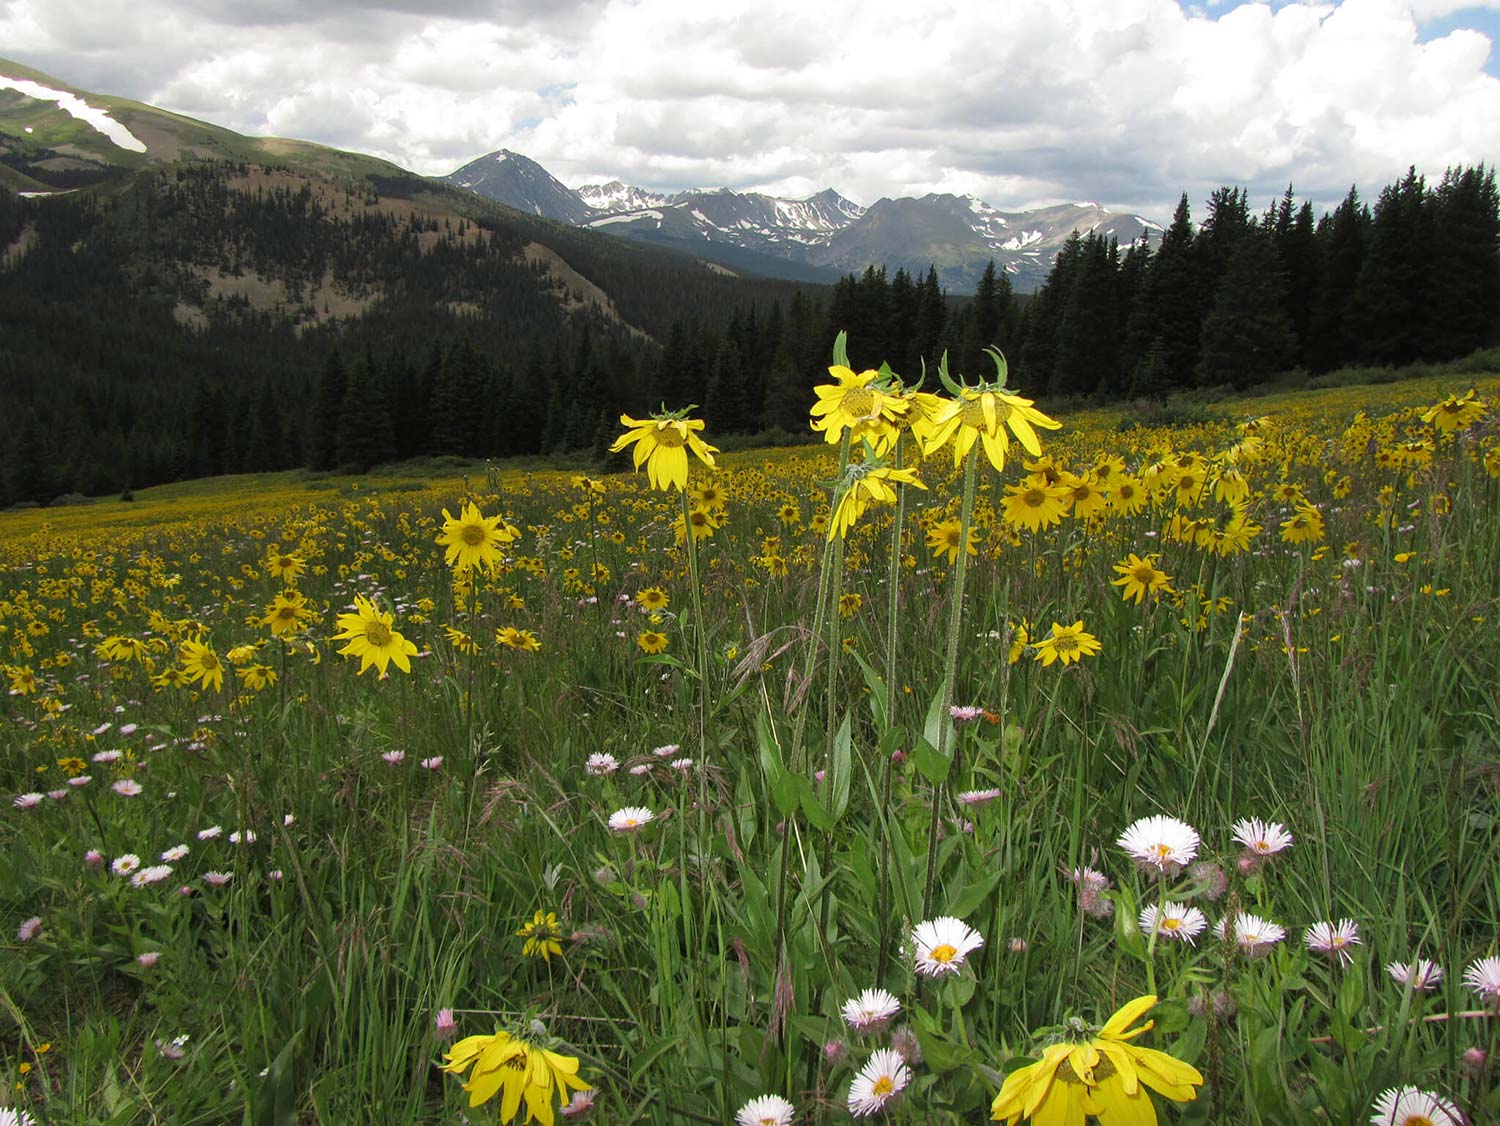 Alpine Sunflower: always facing the rising sun, fields of Alpine Sunflower can be found along Boreas Pass Road. Alpine Sunflower is one of the more commonly found wildflowers in Breckenridge.